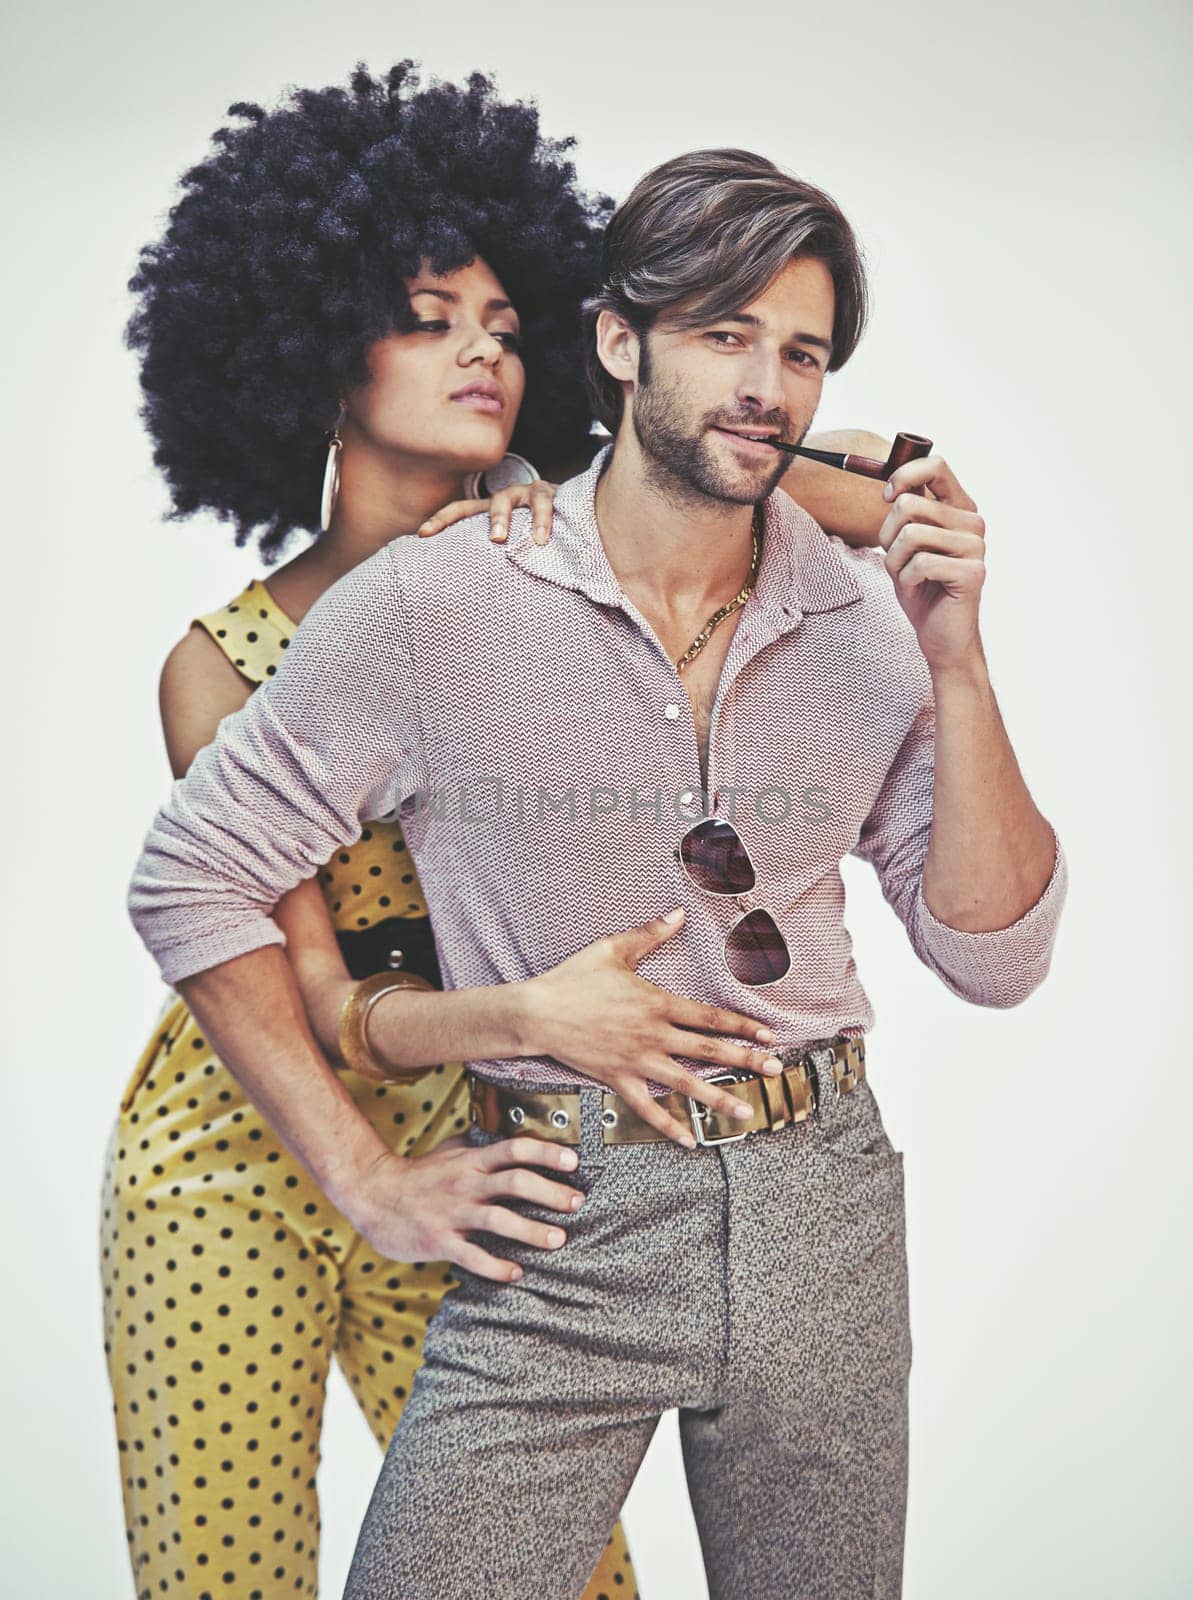 Couple, portrait and fashion with pipe for smoking, style or outfit on a gray studio background. Young interracial man, woman or smoker in stylish pants, shirt or jumpsuit with jewelry or accessories.